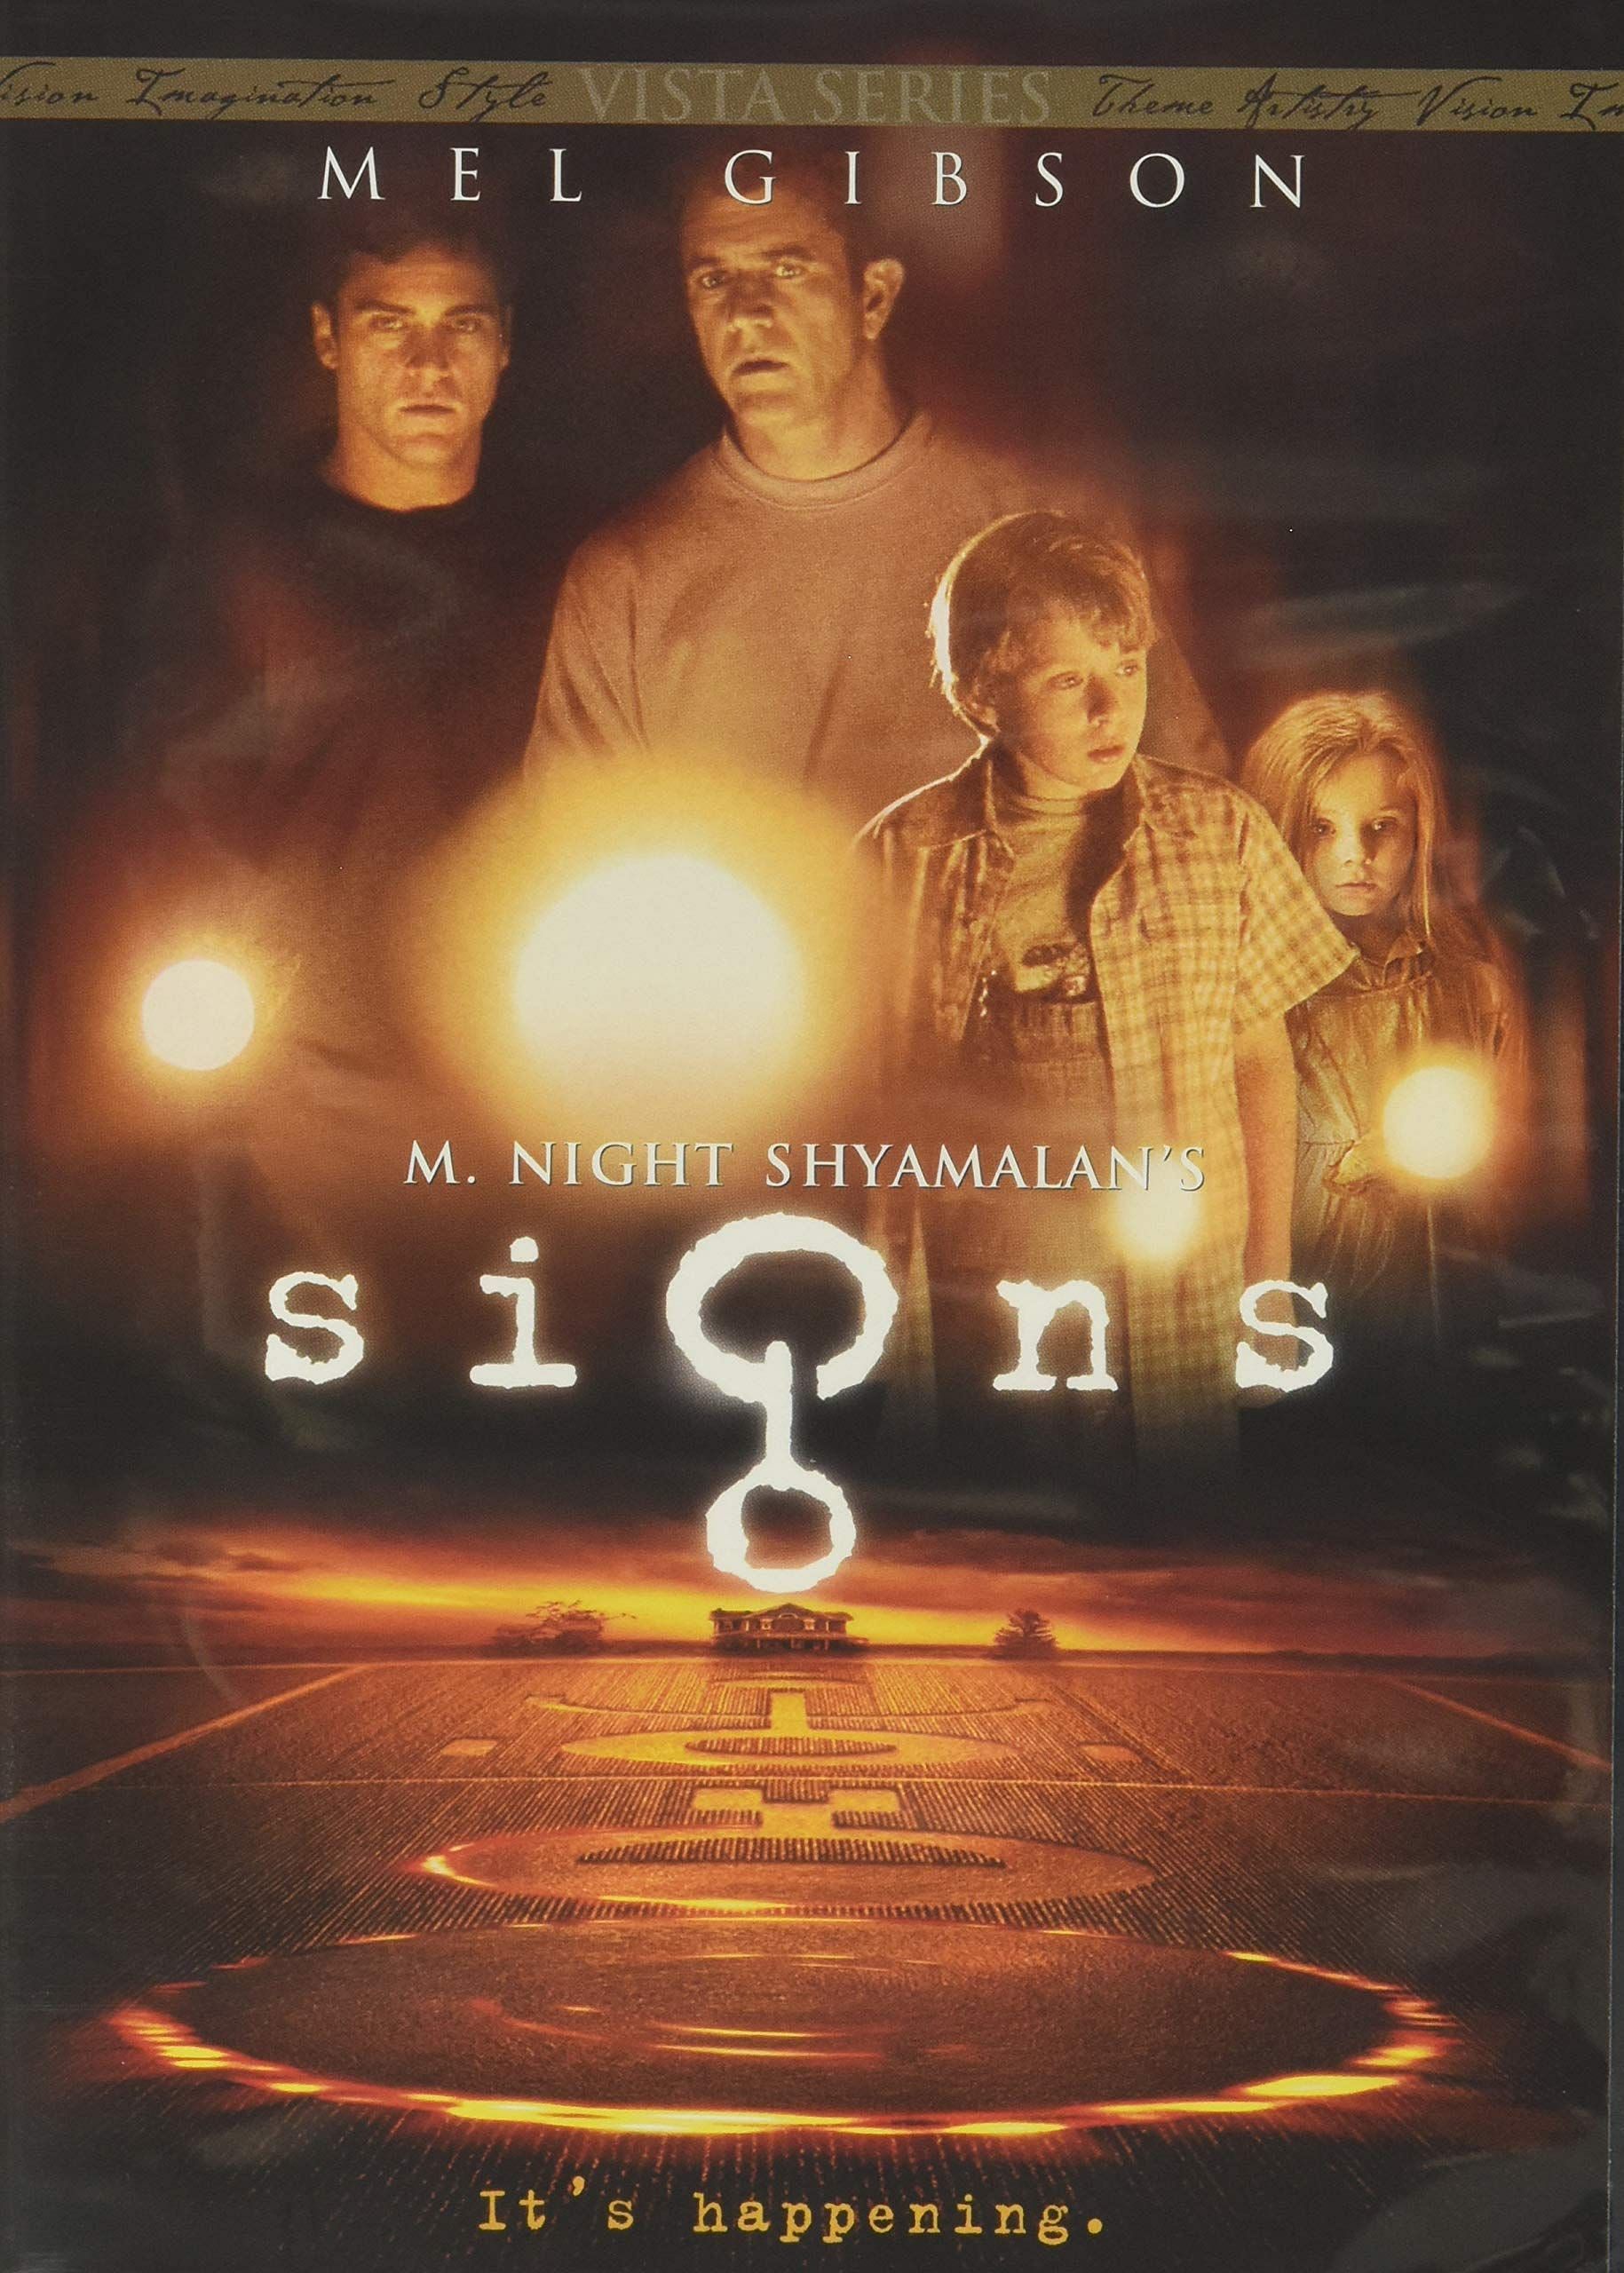 Signs (Image via Touchstone Pictures)